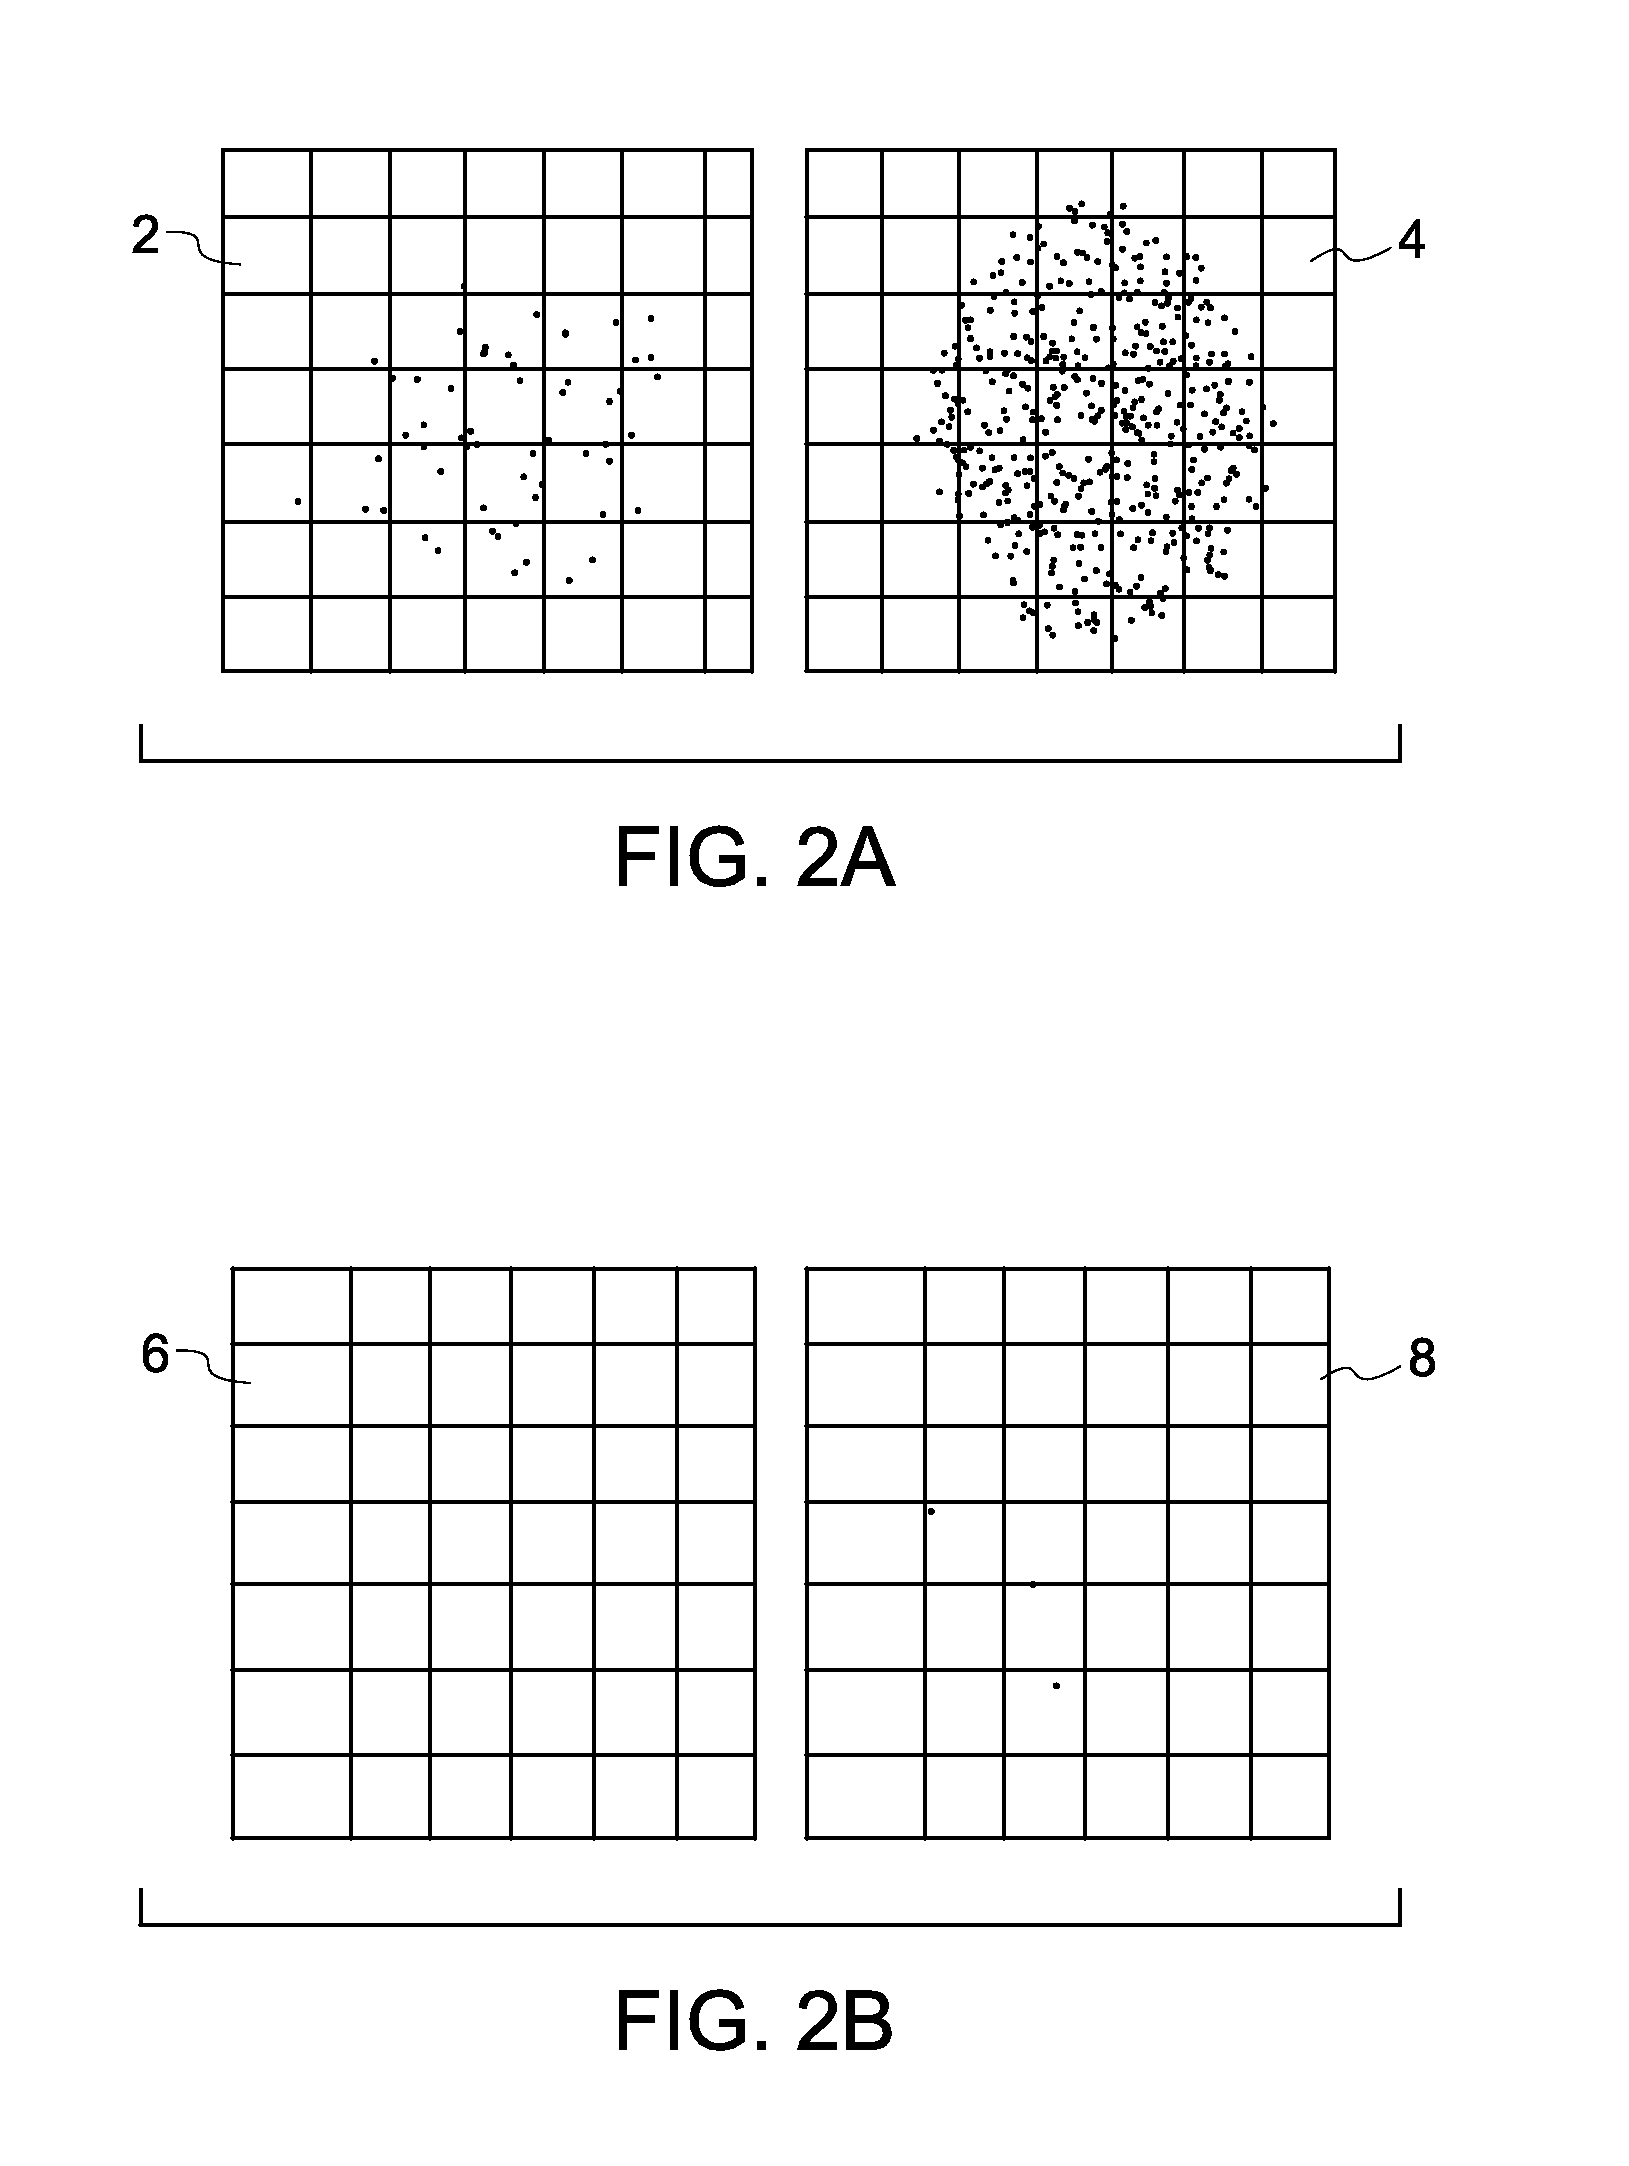 Non bio-adhesive polymer coating composition, articles and devices thereof